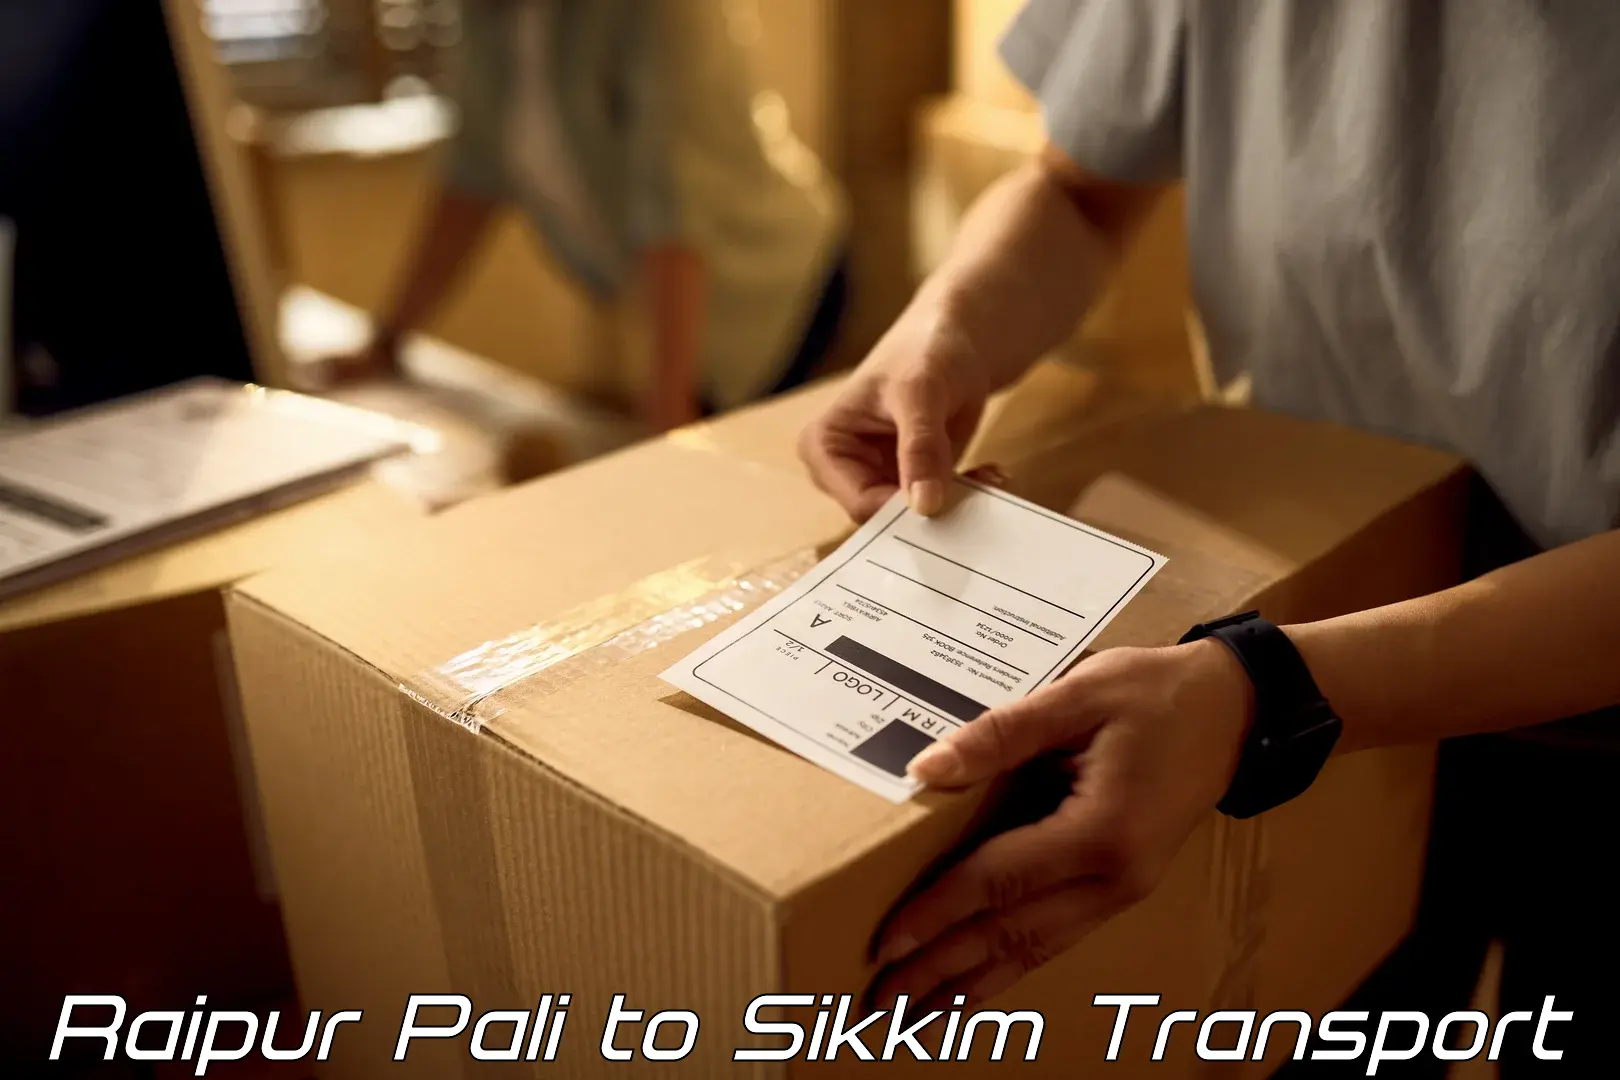 Air cargo transport services Raipur Pali to East Sikkim